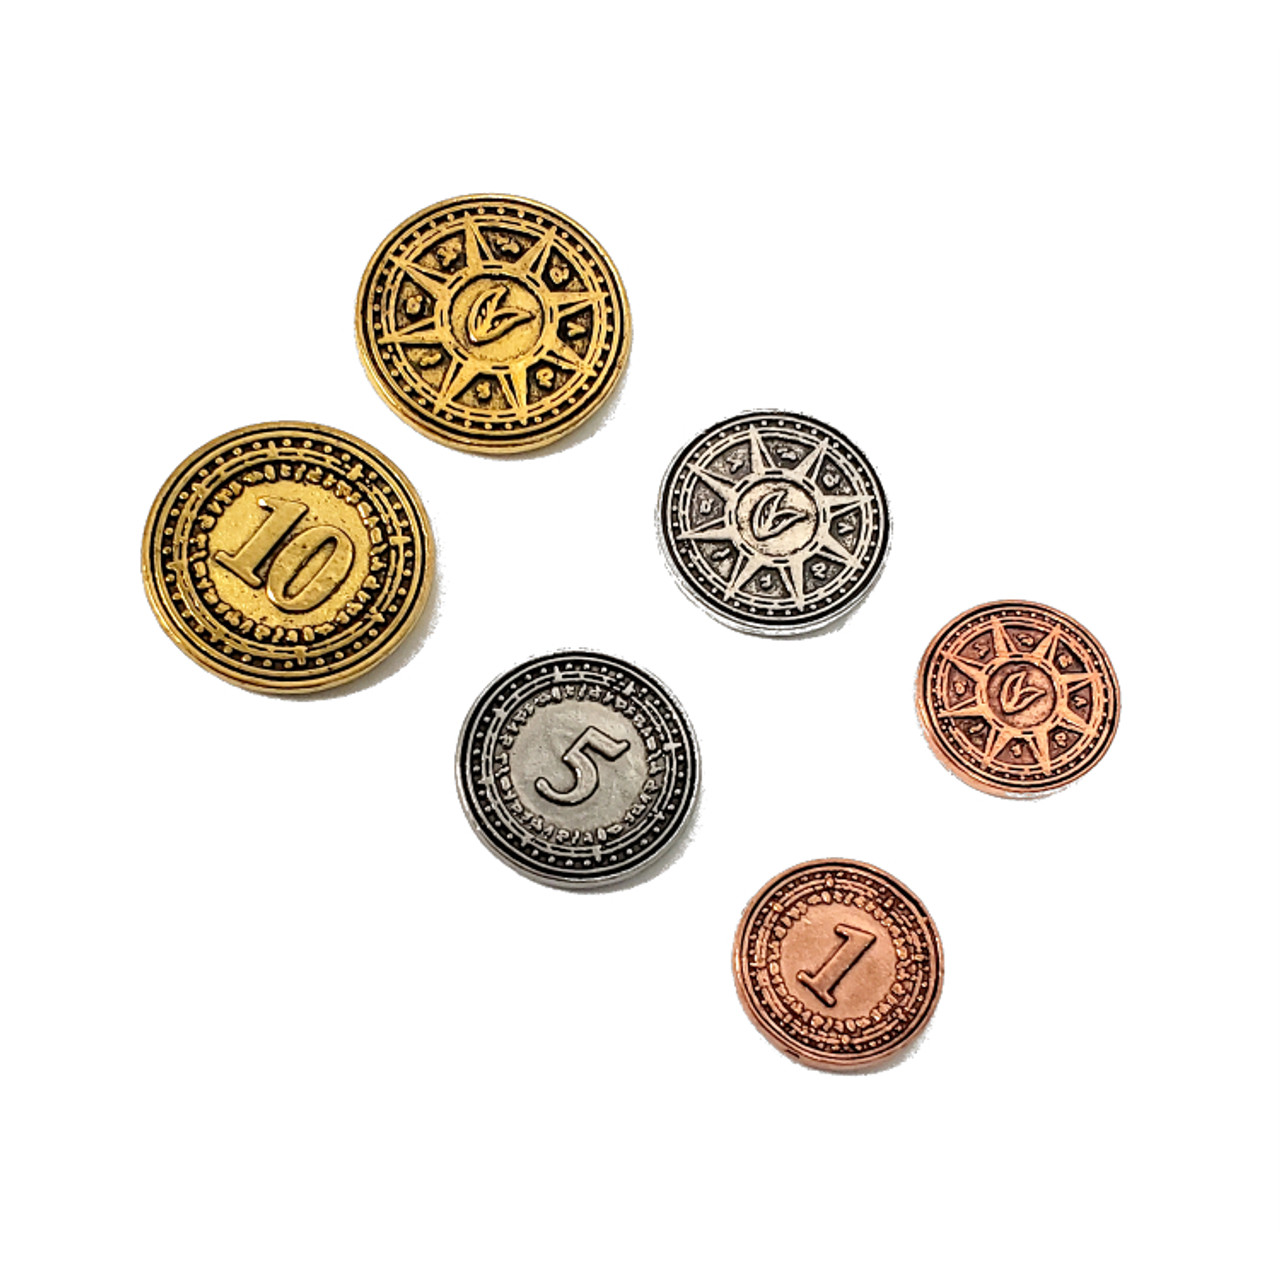 Giochistarter: Historical metal coins wave 4